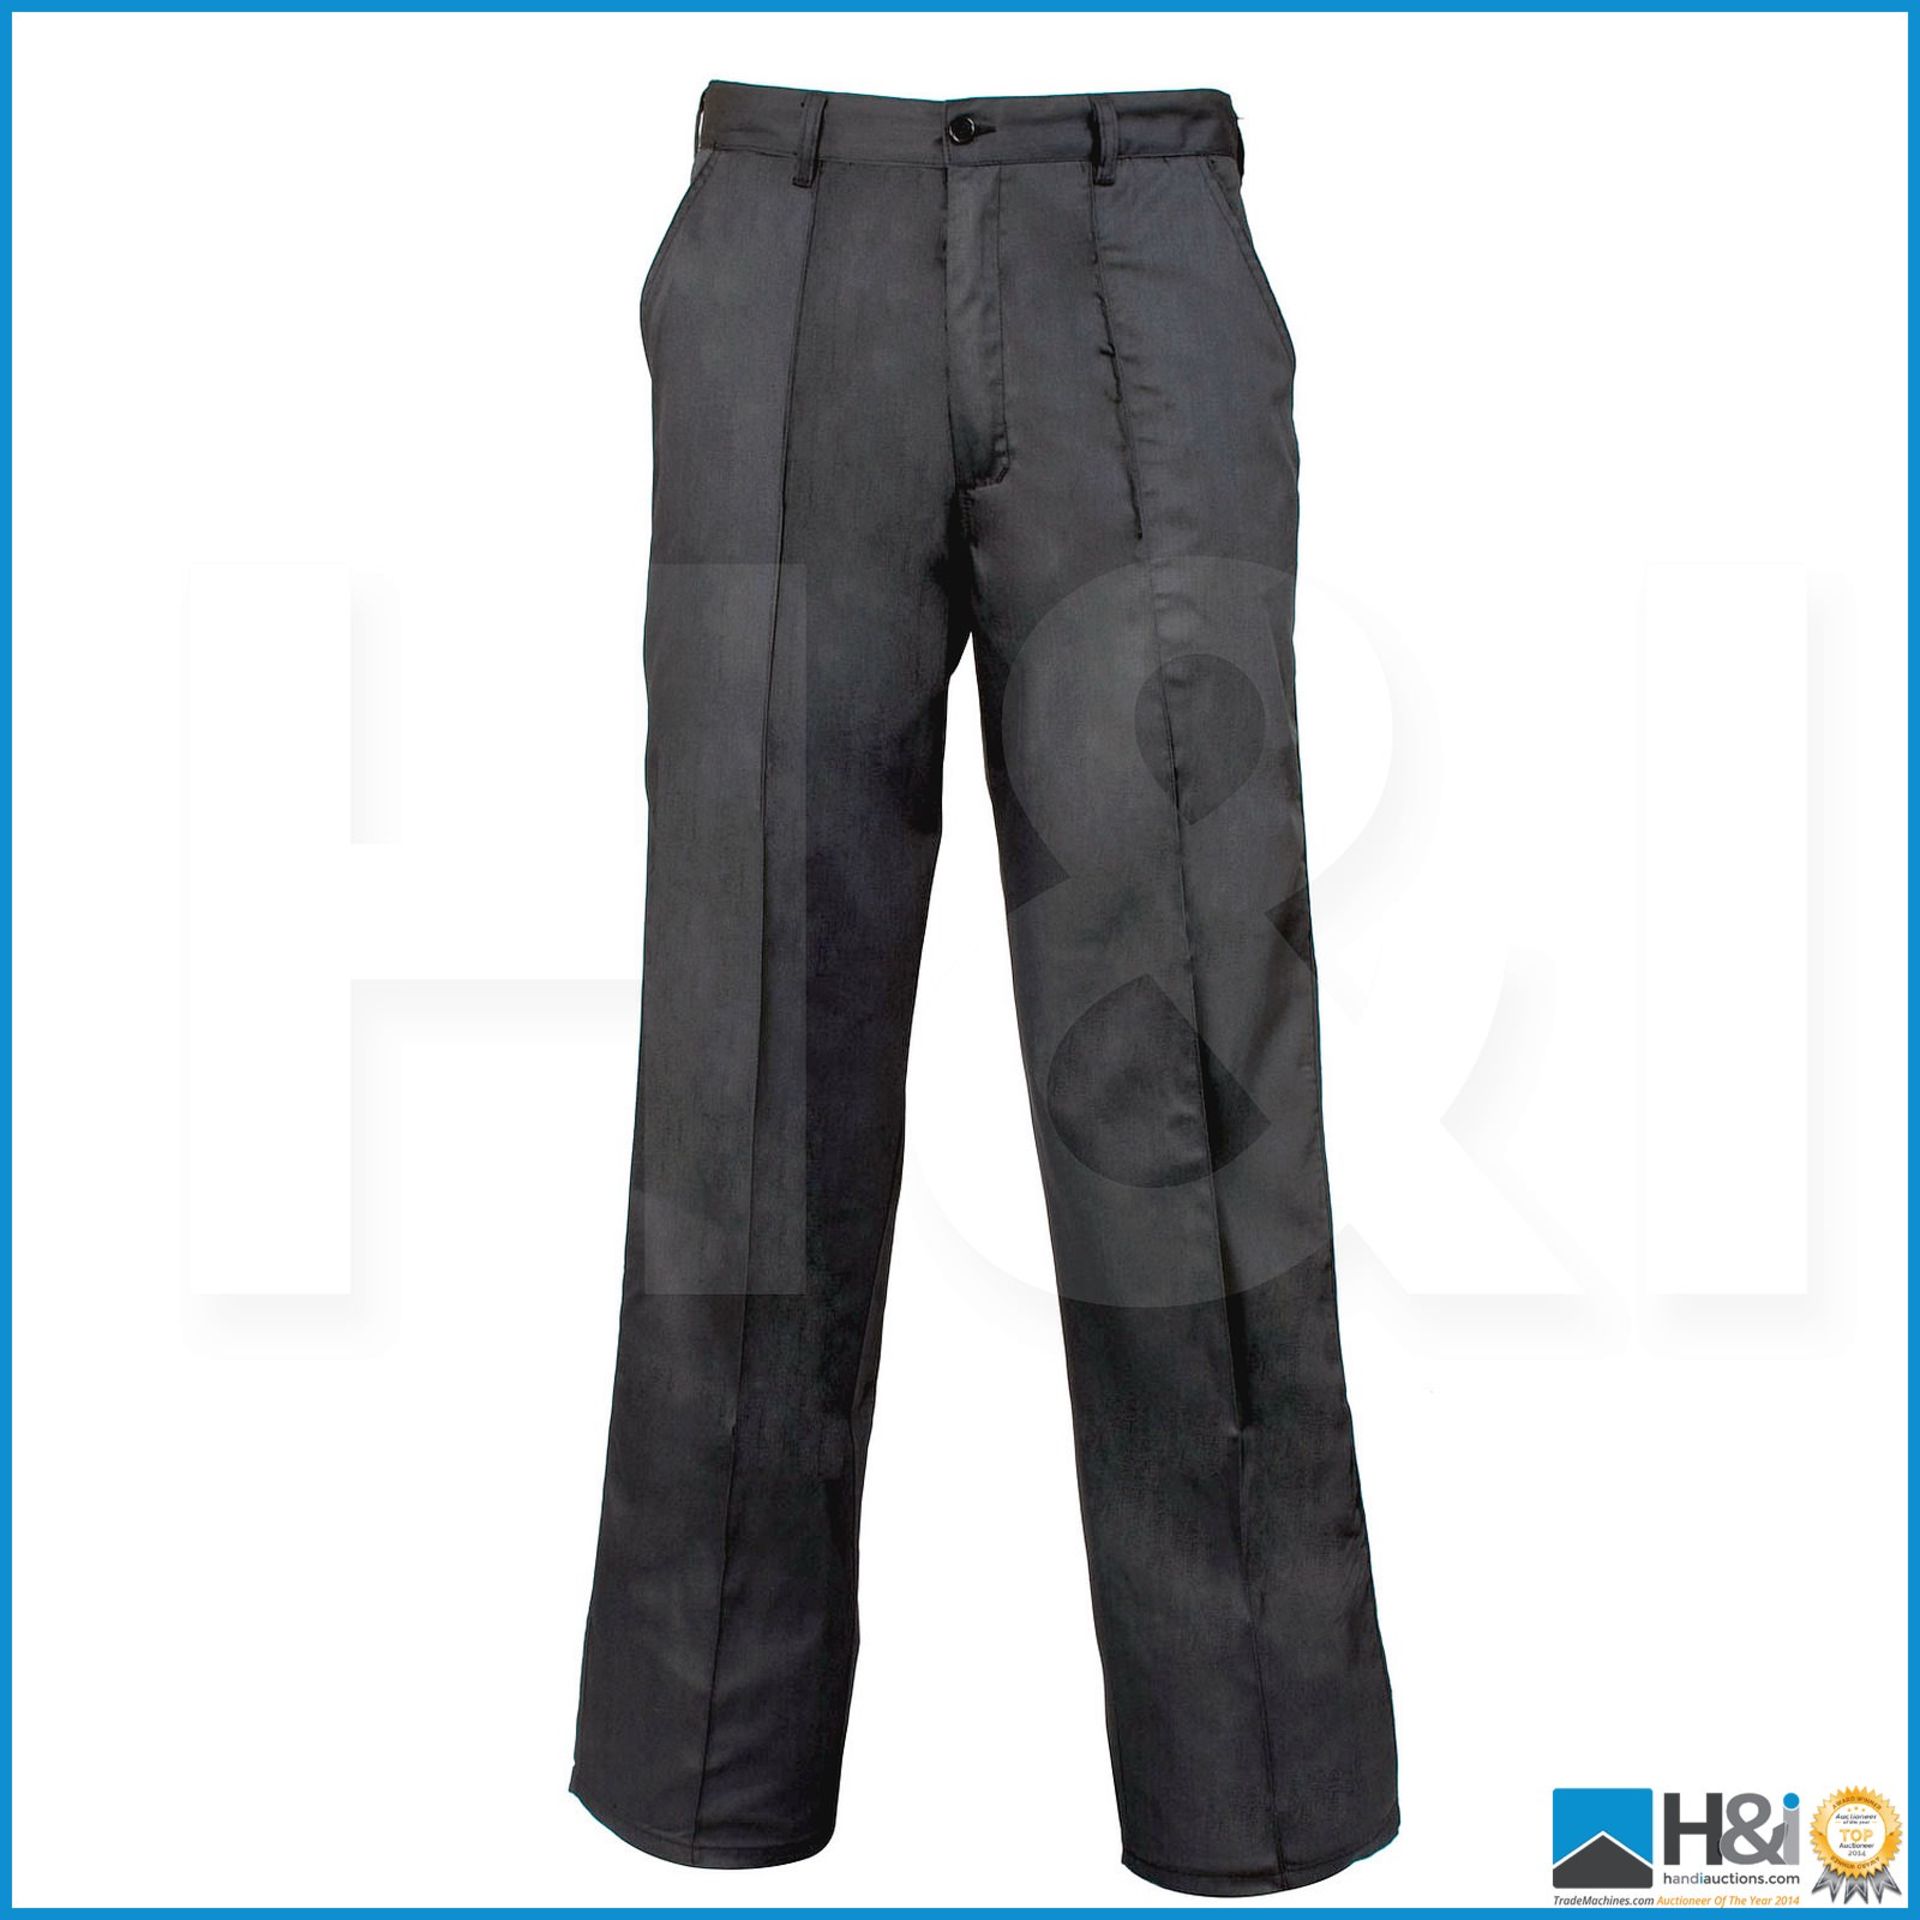 20 x high quality SuperTouch Reg Trouser - Black - W40 - 210 Gms - Poly/Cot 65/35 - 3 Pockets . Sugg